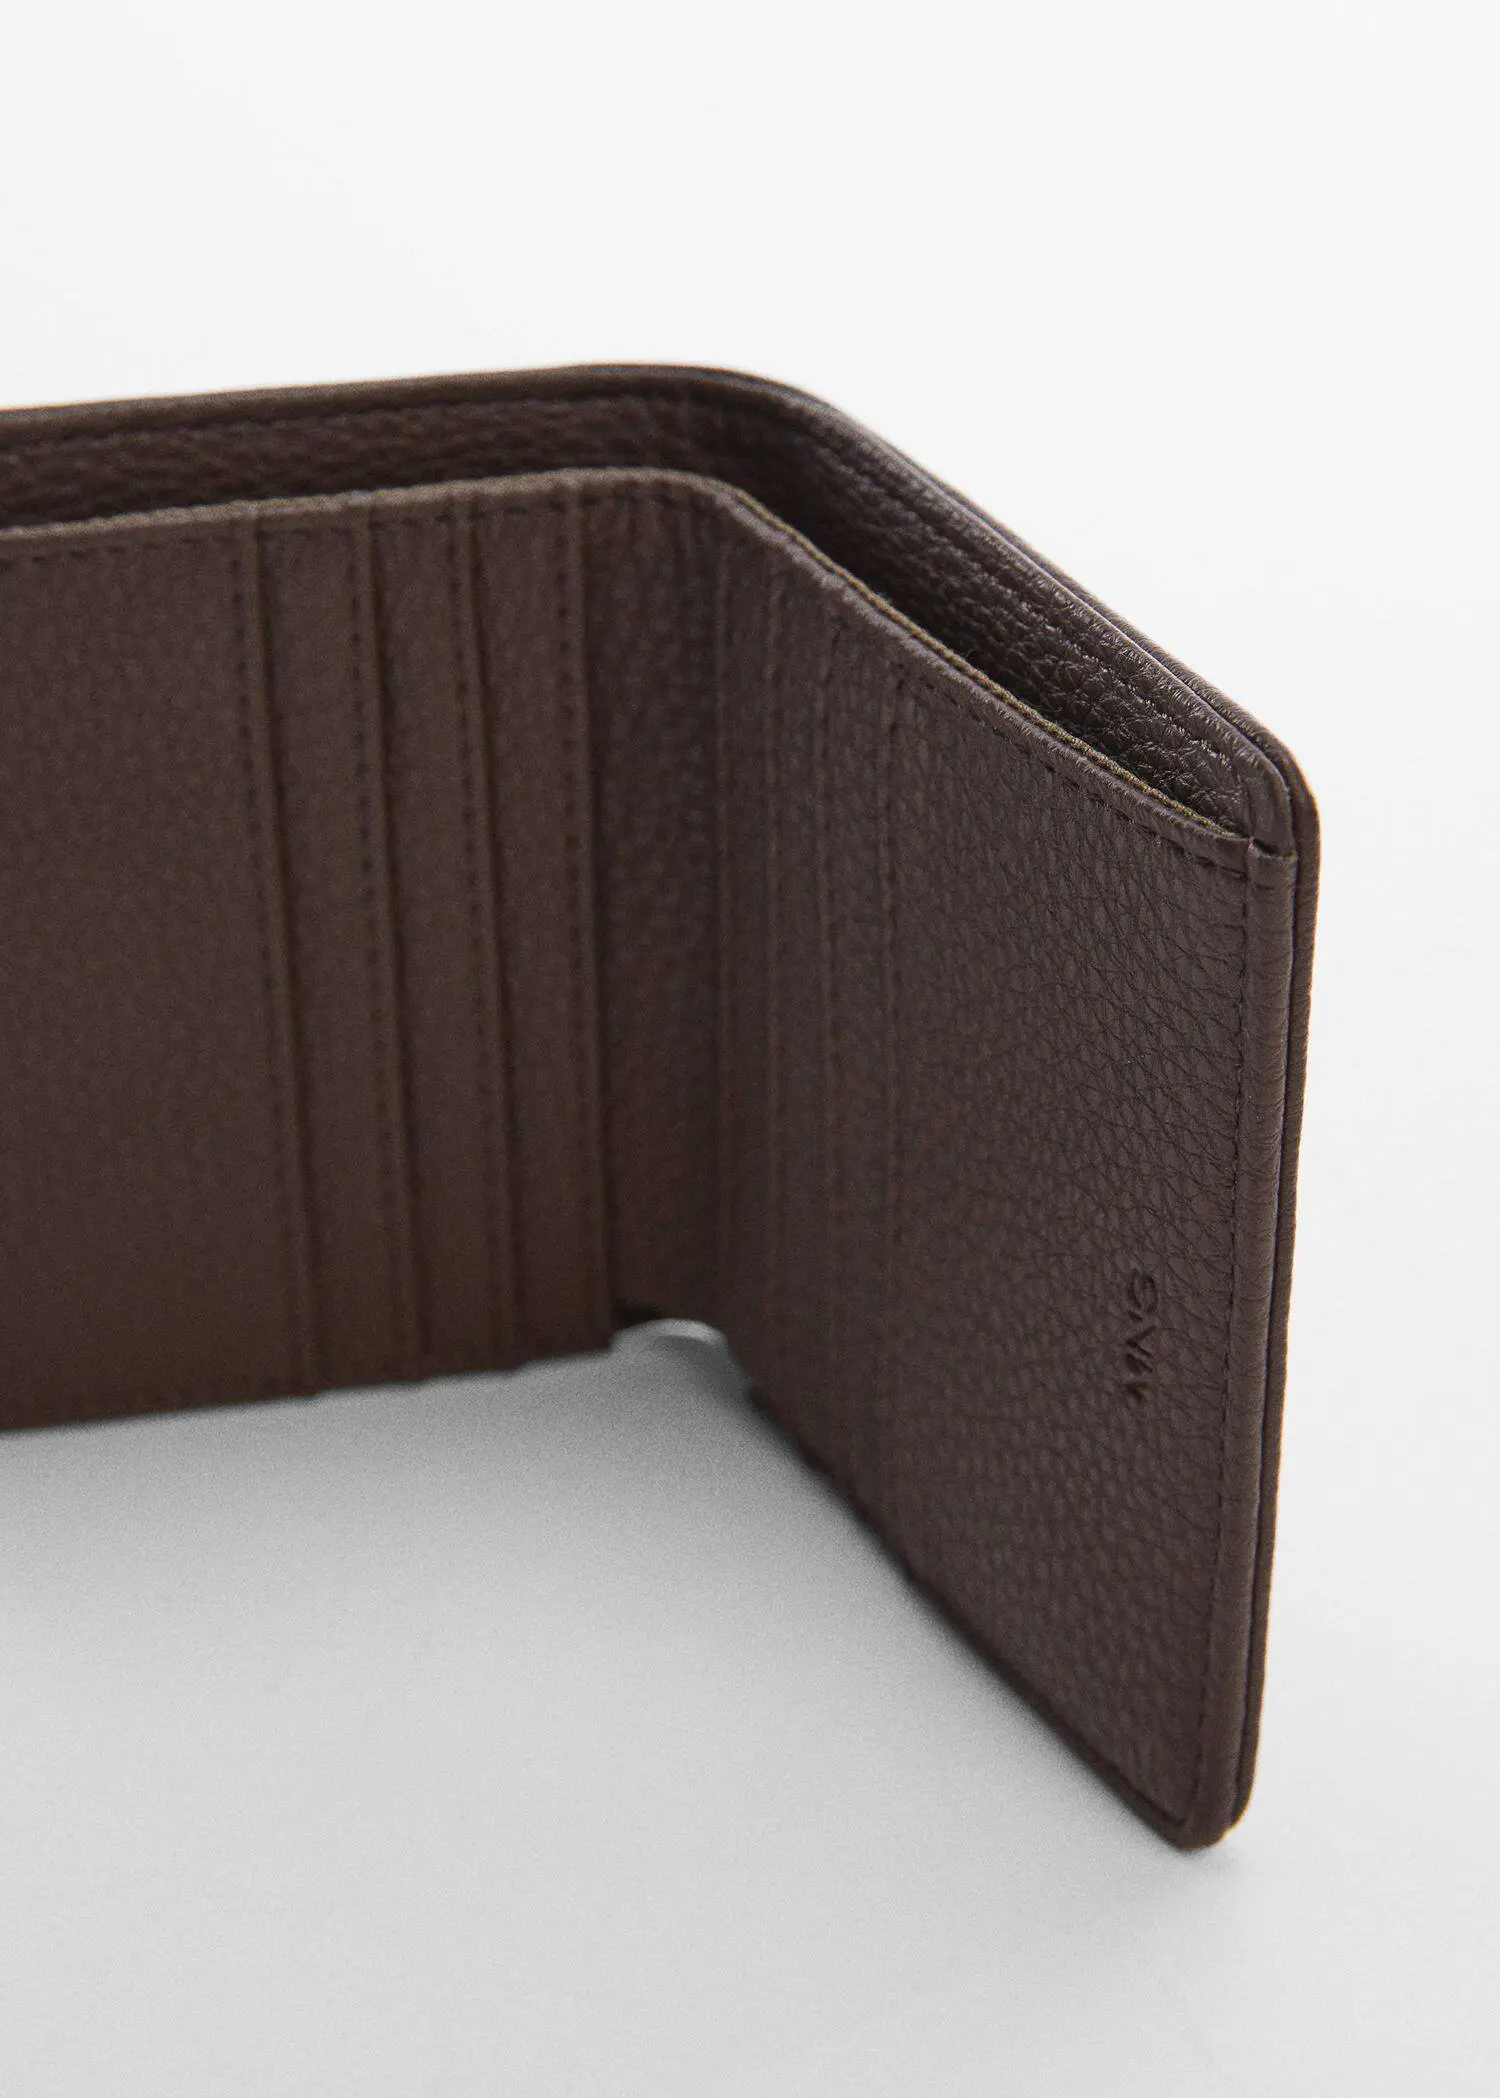 Mango Anti-contactless wallet. a close-up view of the inside of a brown wallet. 